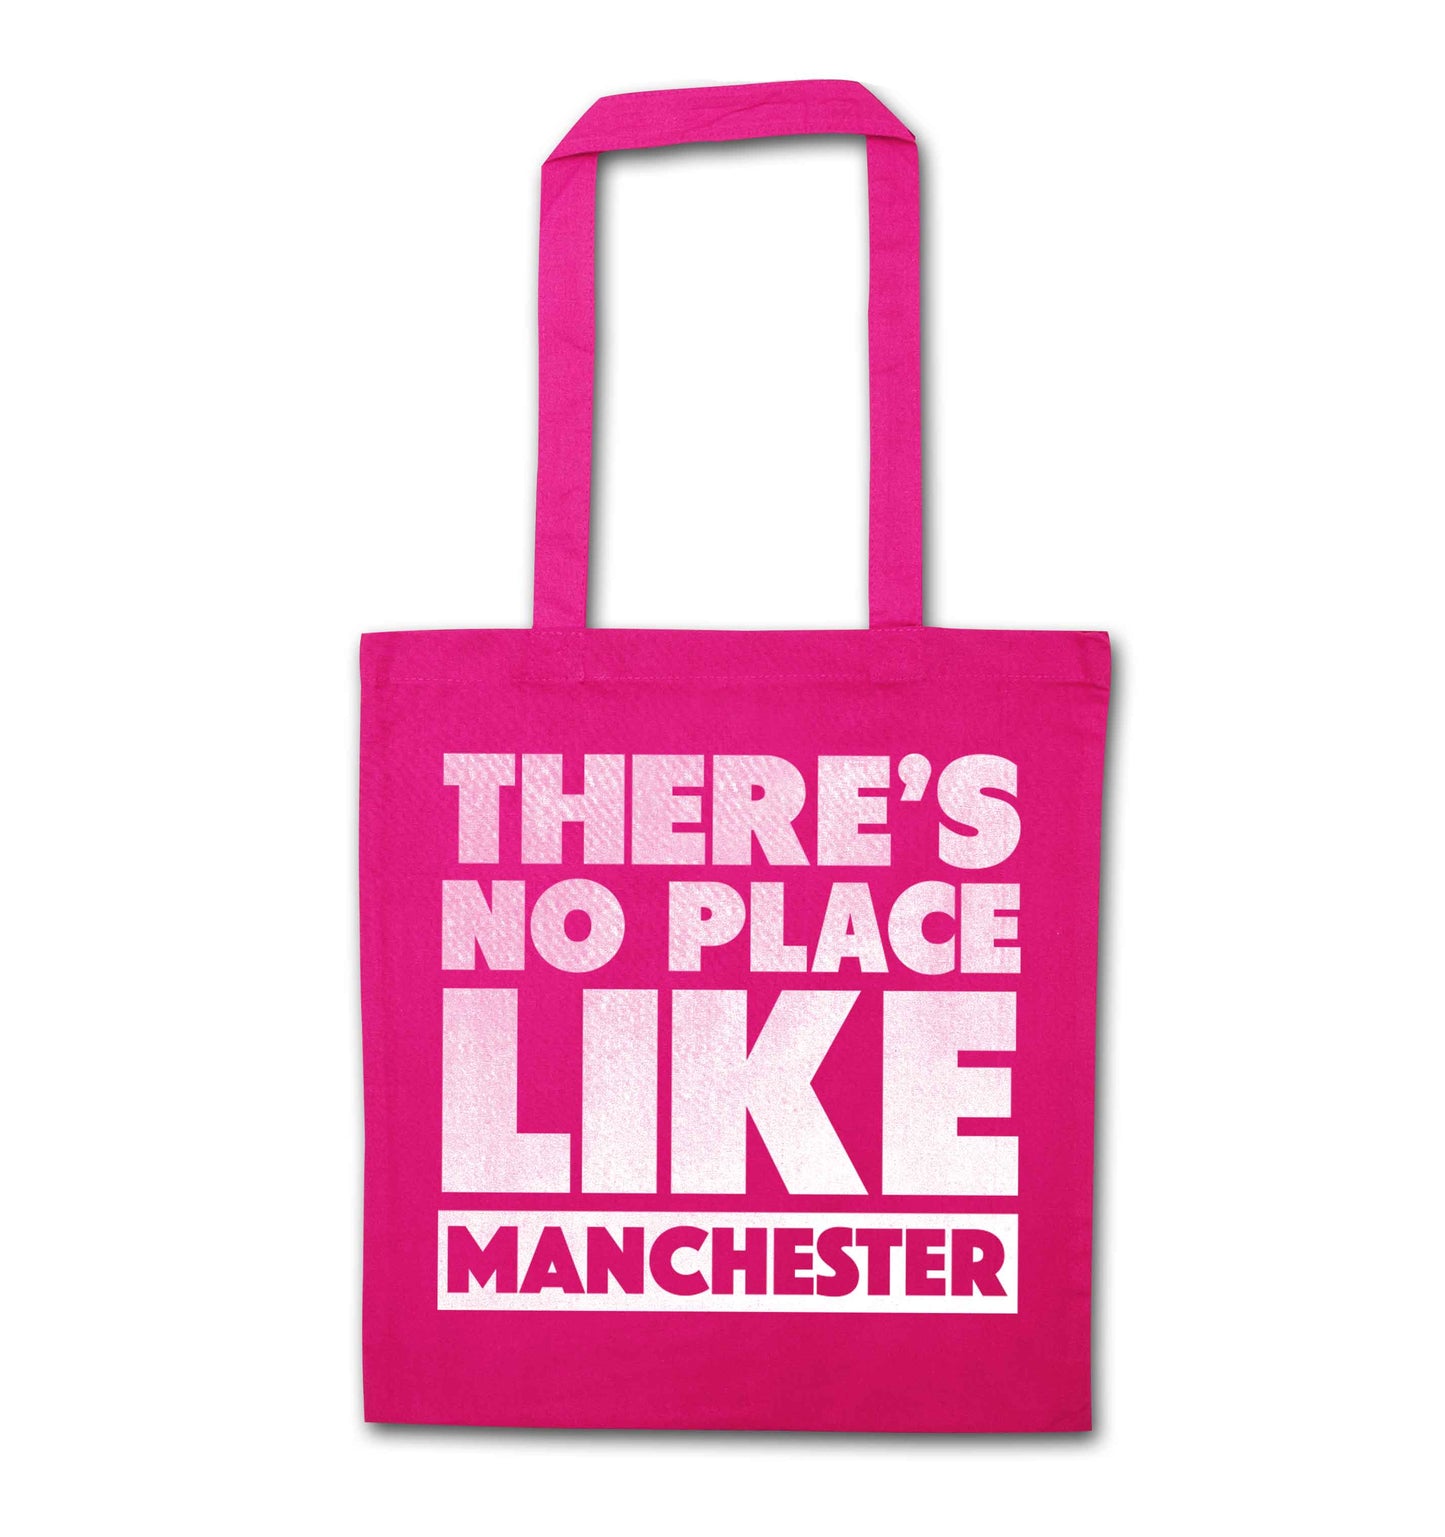 There's no place like Manchester pink tote bag